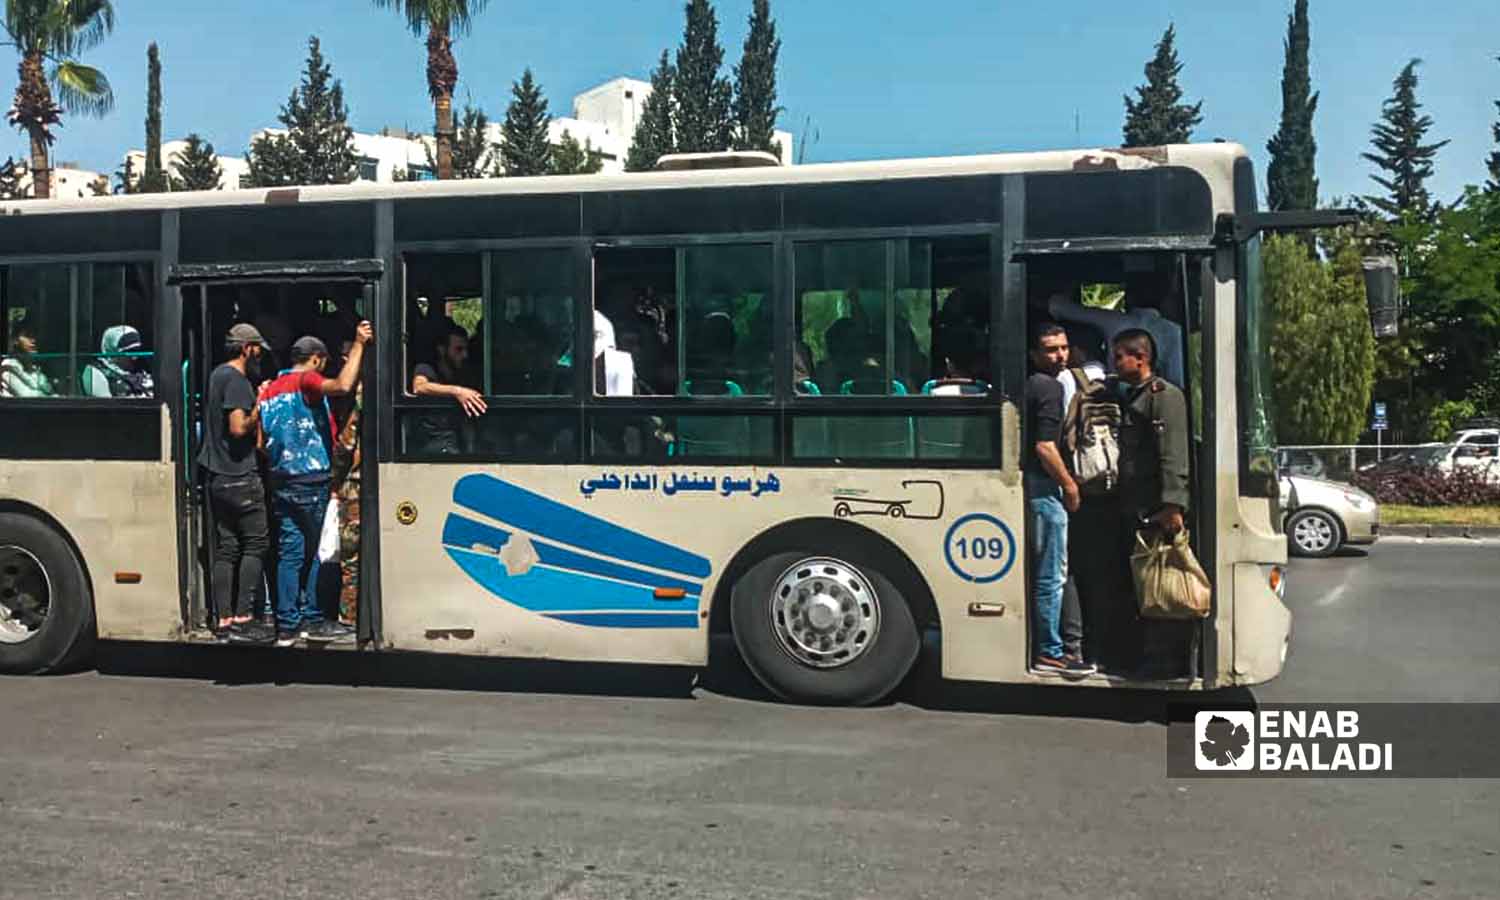 Damascus suffers from a shortage of and overcrowded public transportation buses - 6 June 2022 (Enab Baladi)